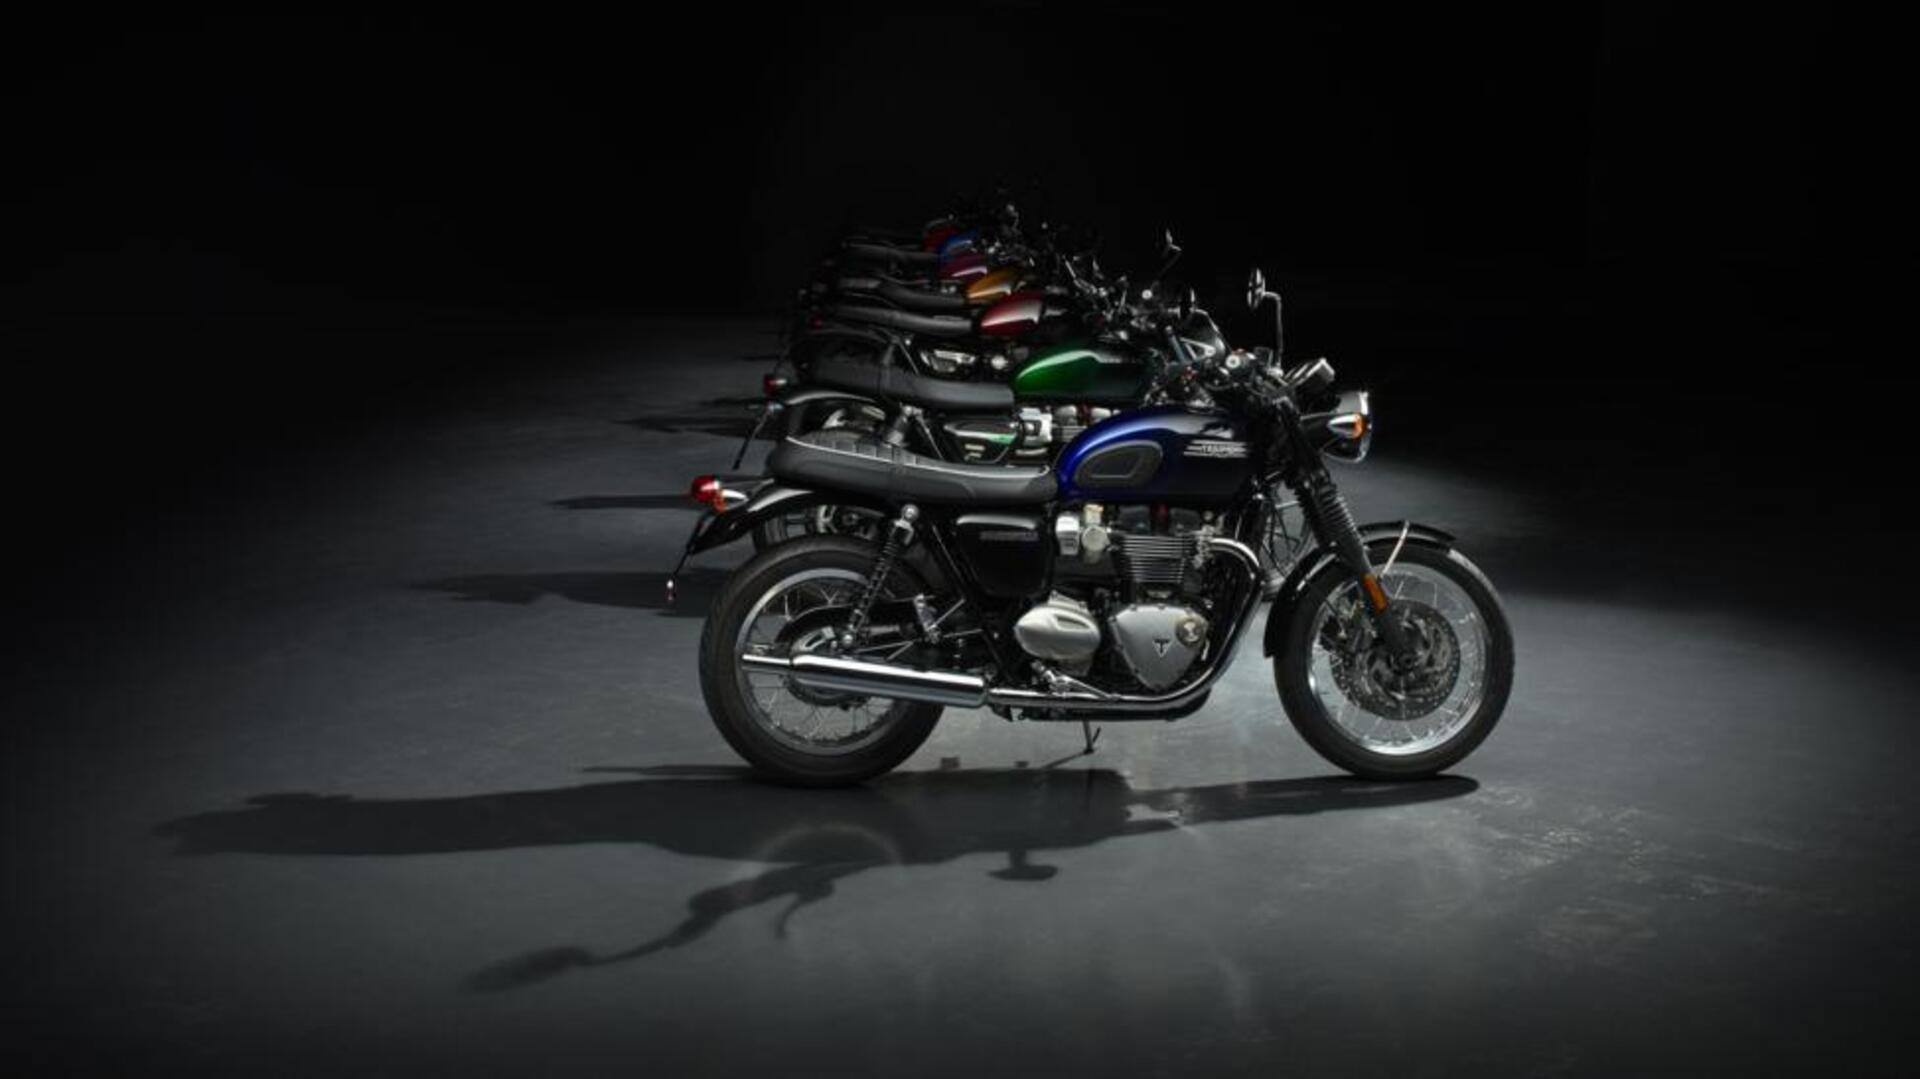 Triumph introduces 'Stealth Edition' motorcycles in India: Check features